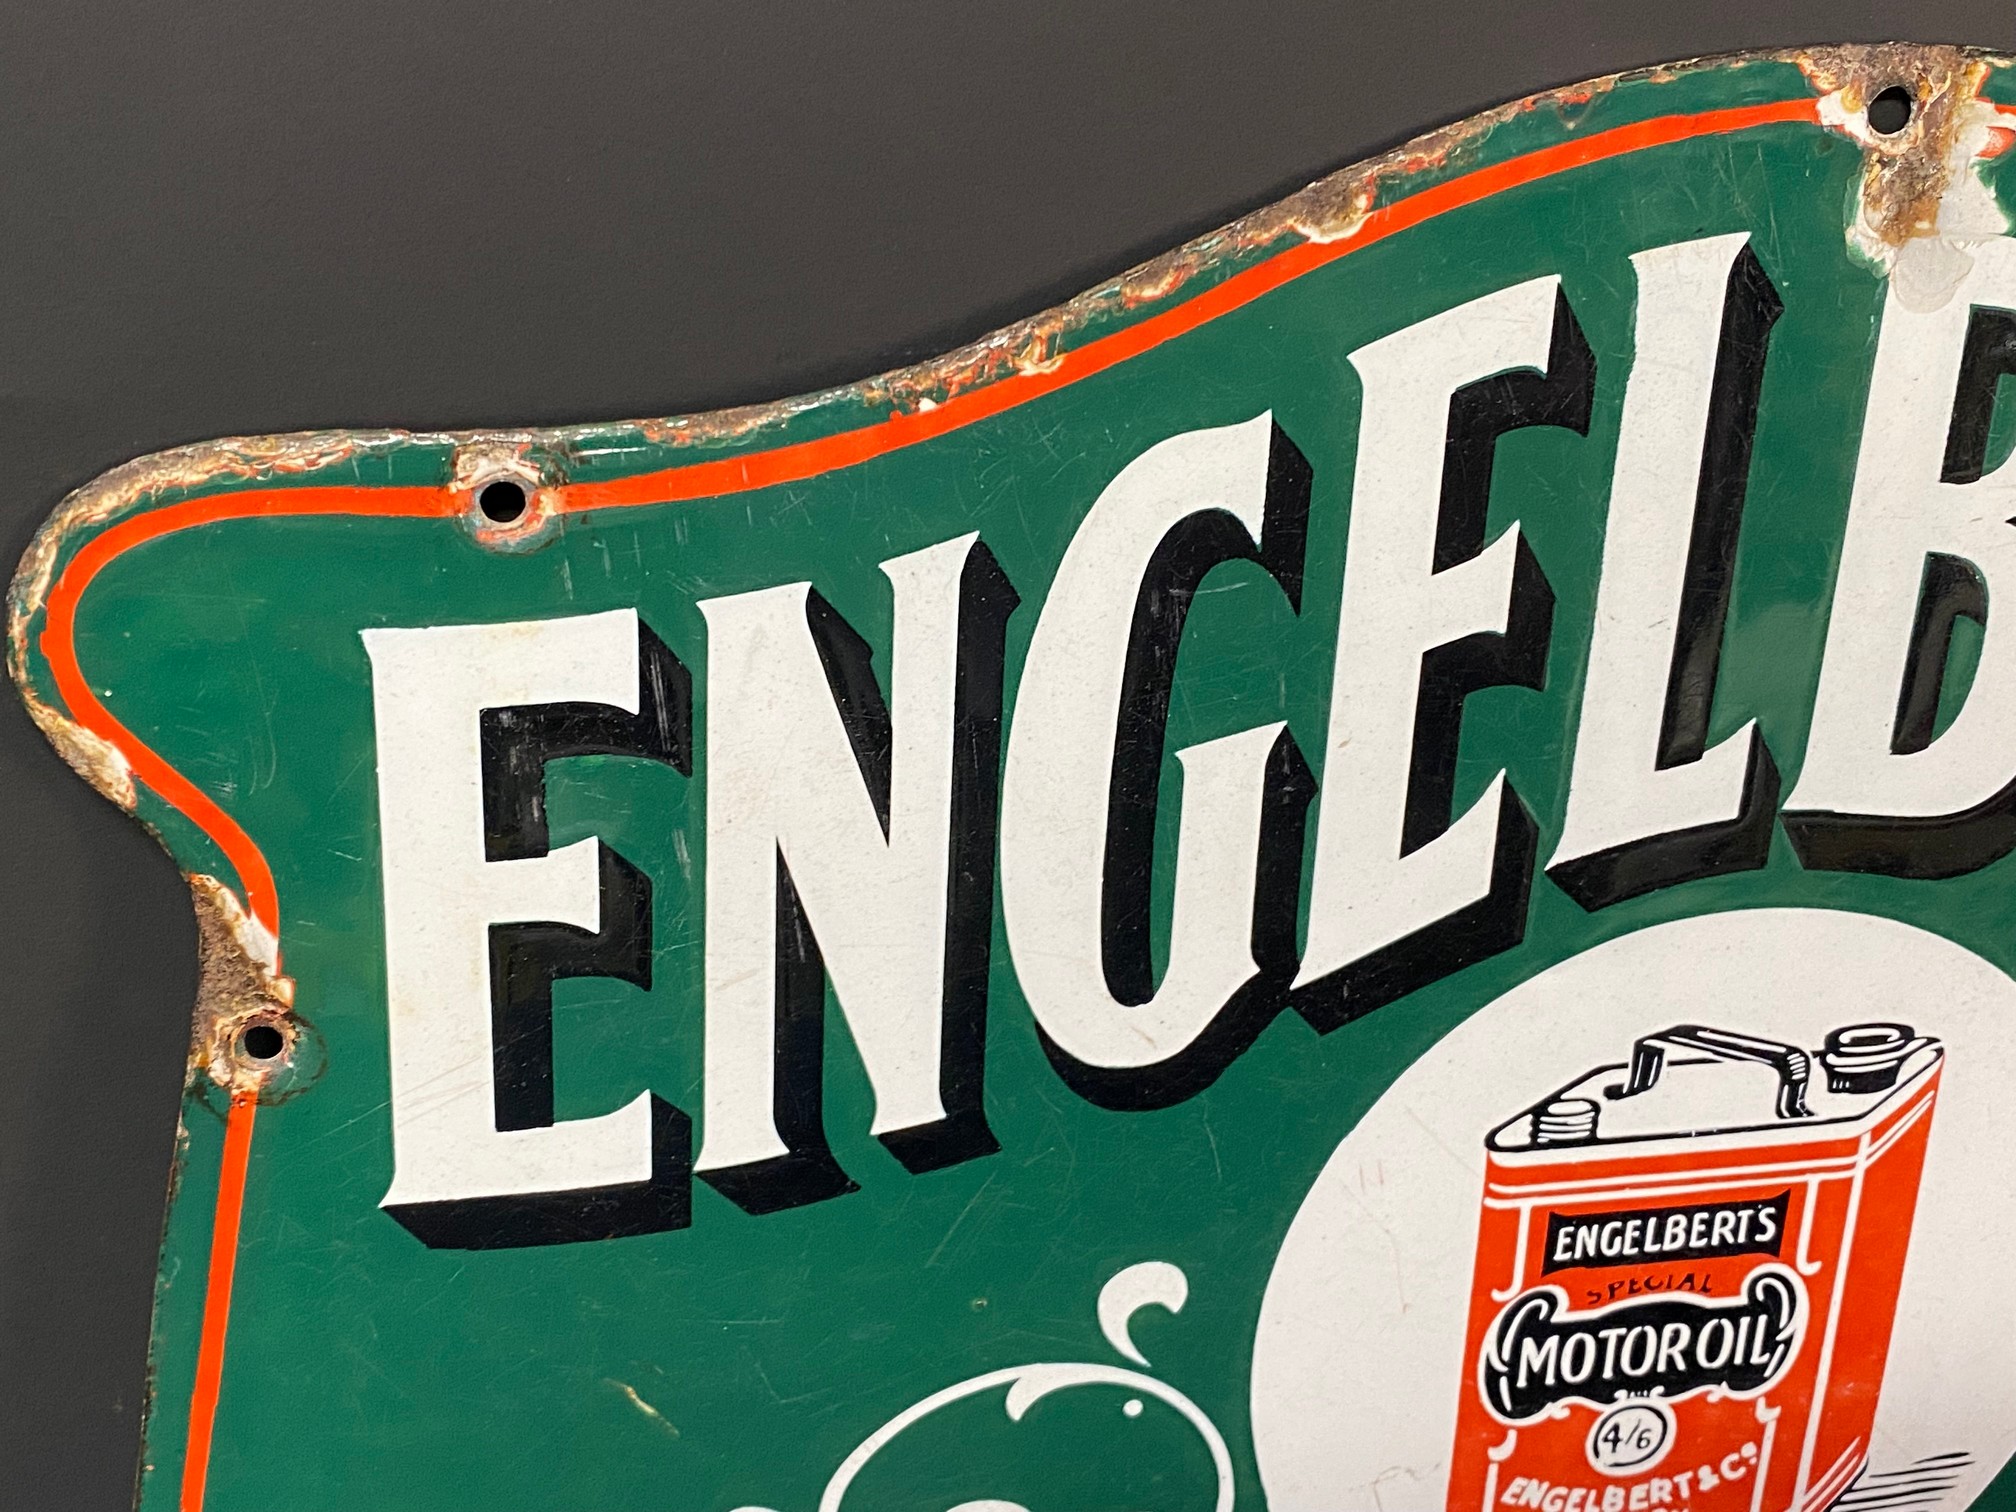 A very rare Engelbert's 'The' Motor Oils shaped double sided enamel sign with an image of a can to - Image 9 of 13